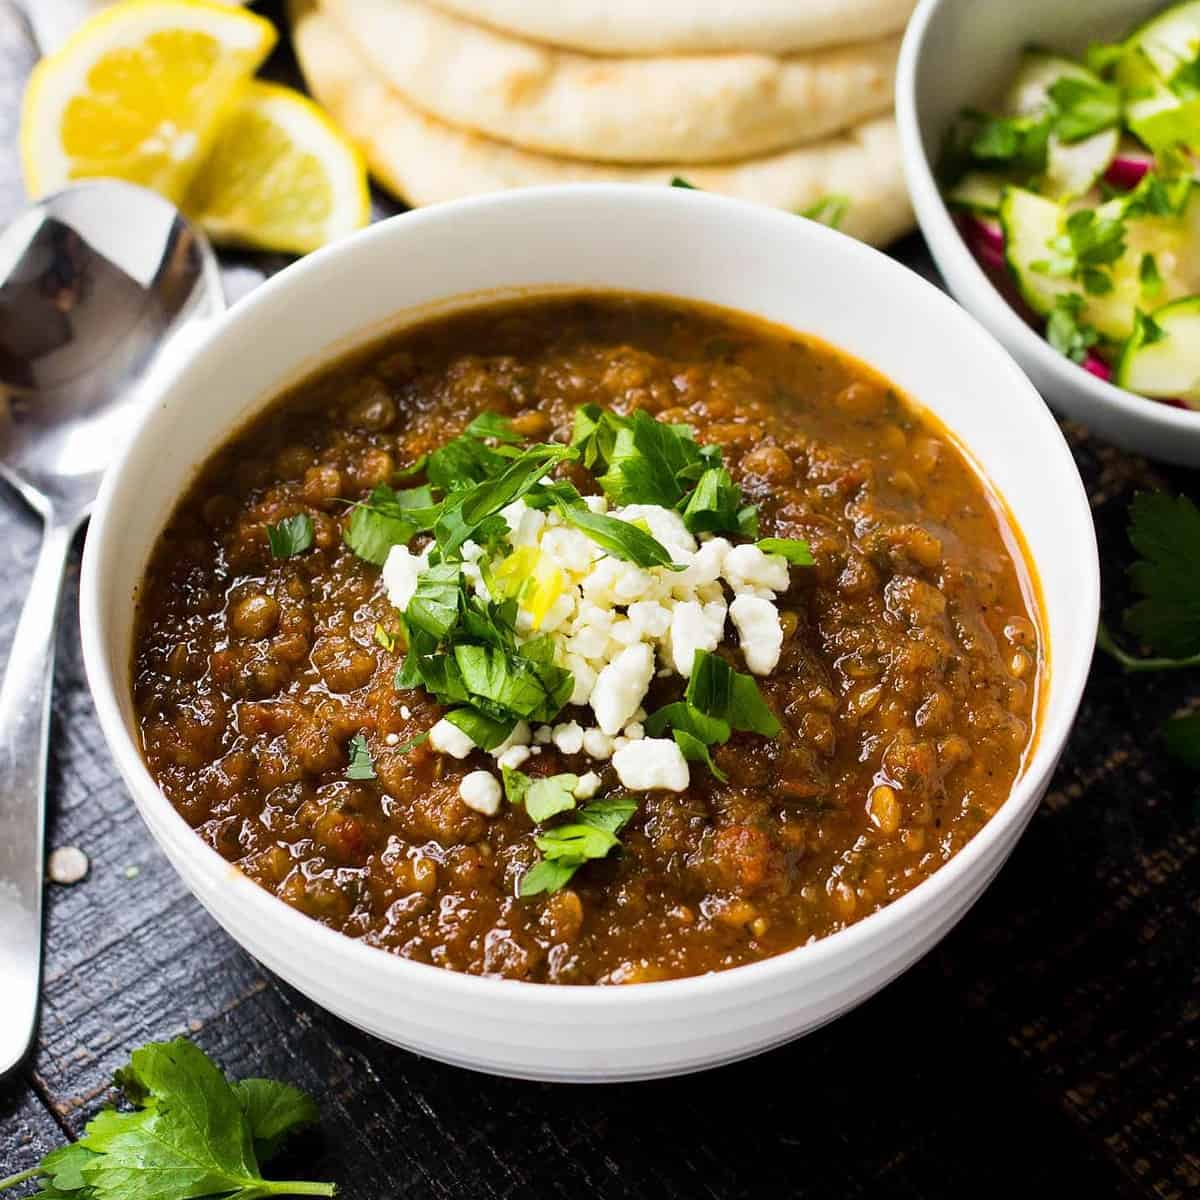  The use of lentils adds a healthy dose of protein and fiber to this vegan soup